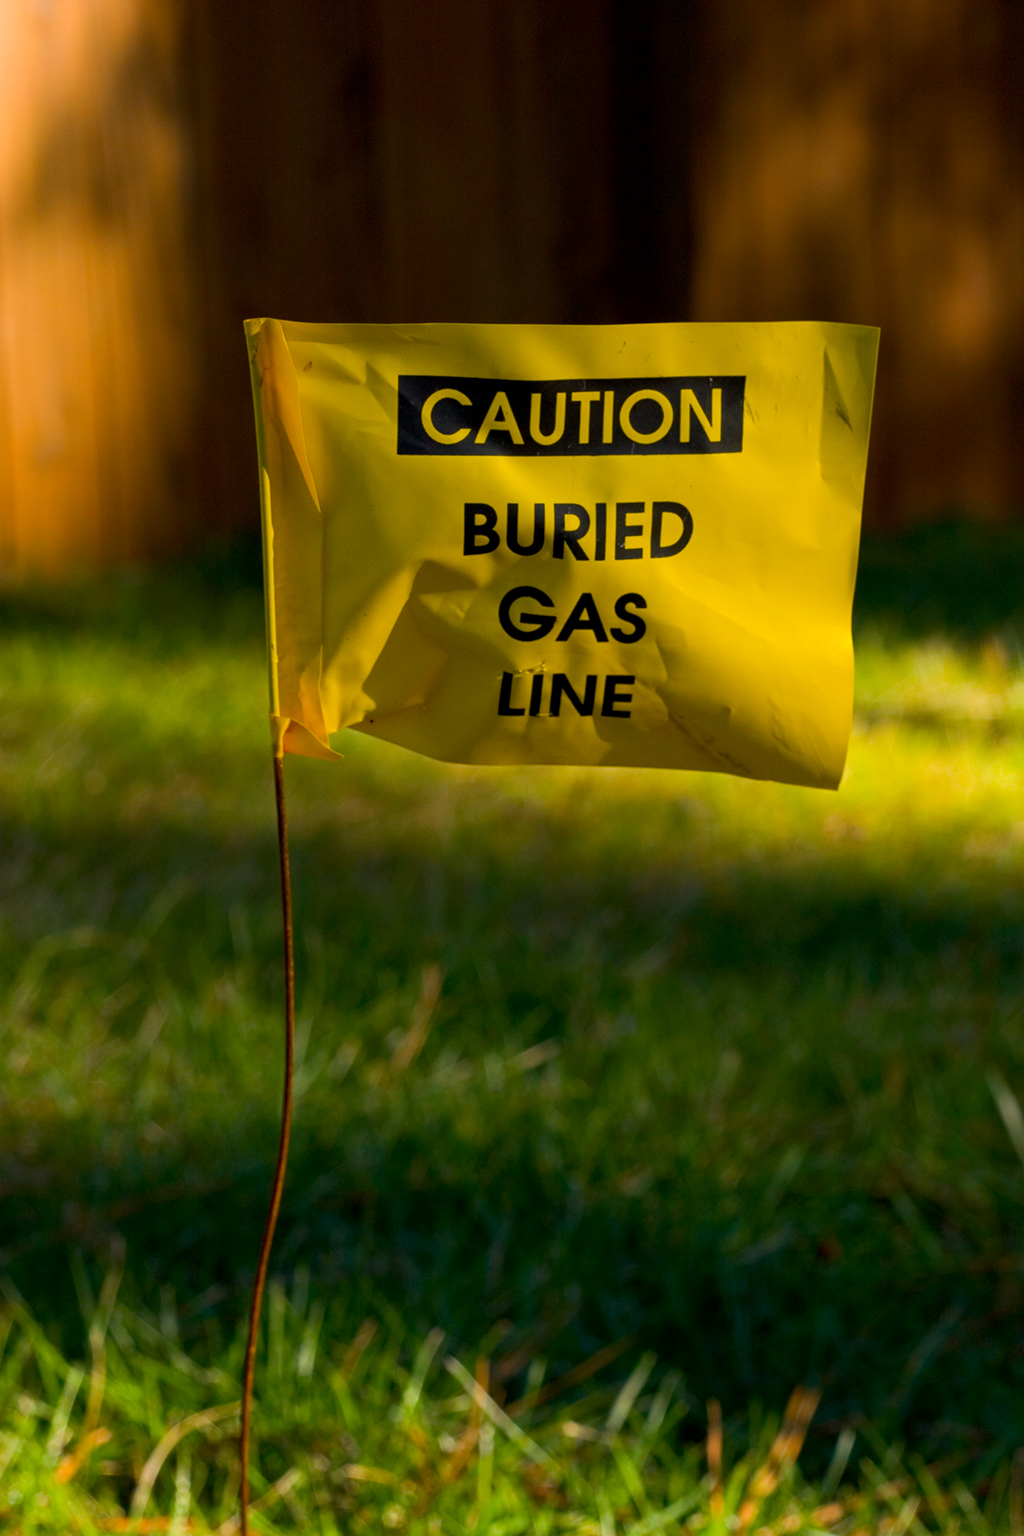 Different Ways To Handle Gas Leaks But First Call An Emergency Plumber | San Antonio, TX